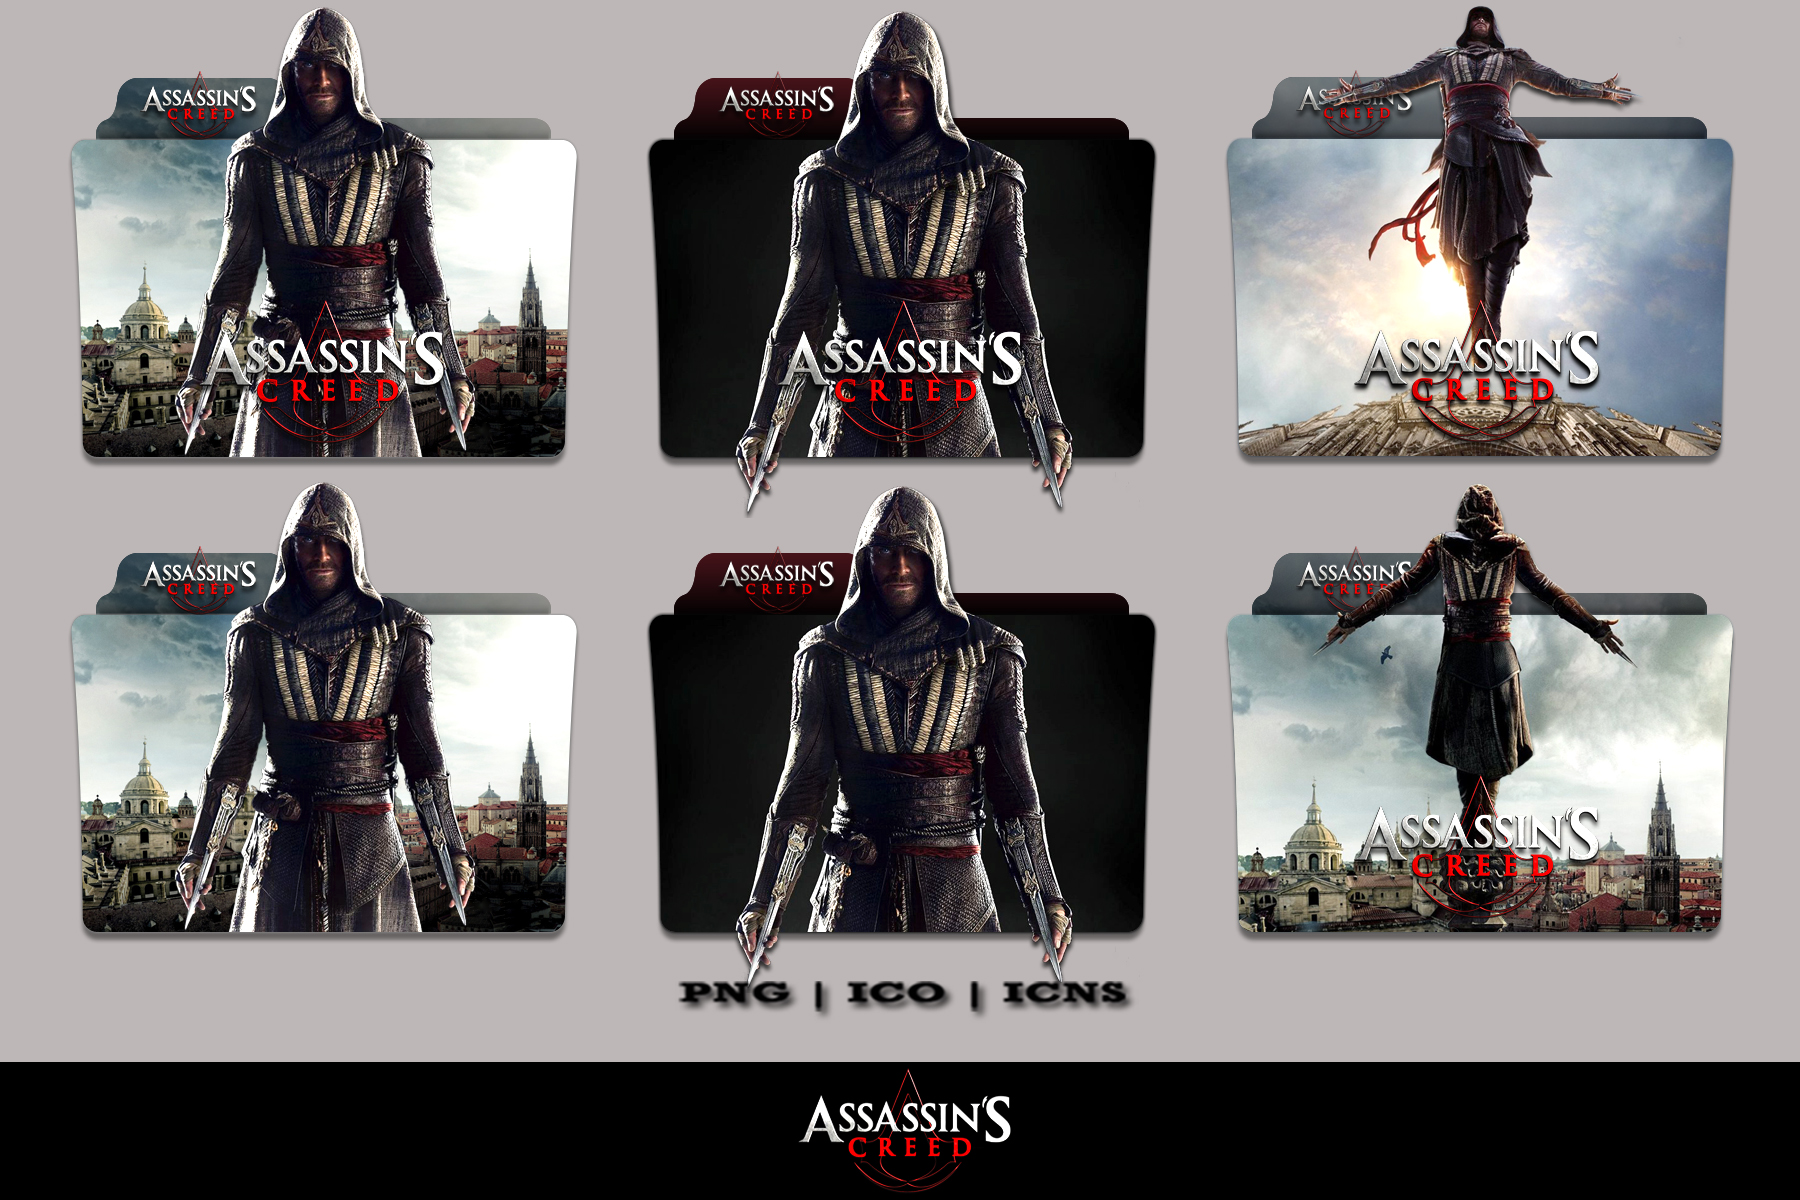 Assassin's creed bloodlines icon by agentromi on DeviantArt